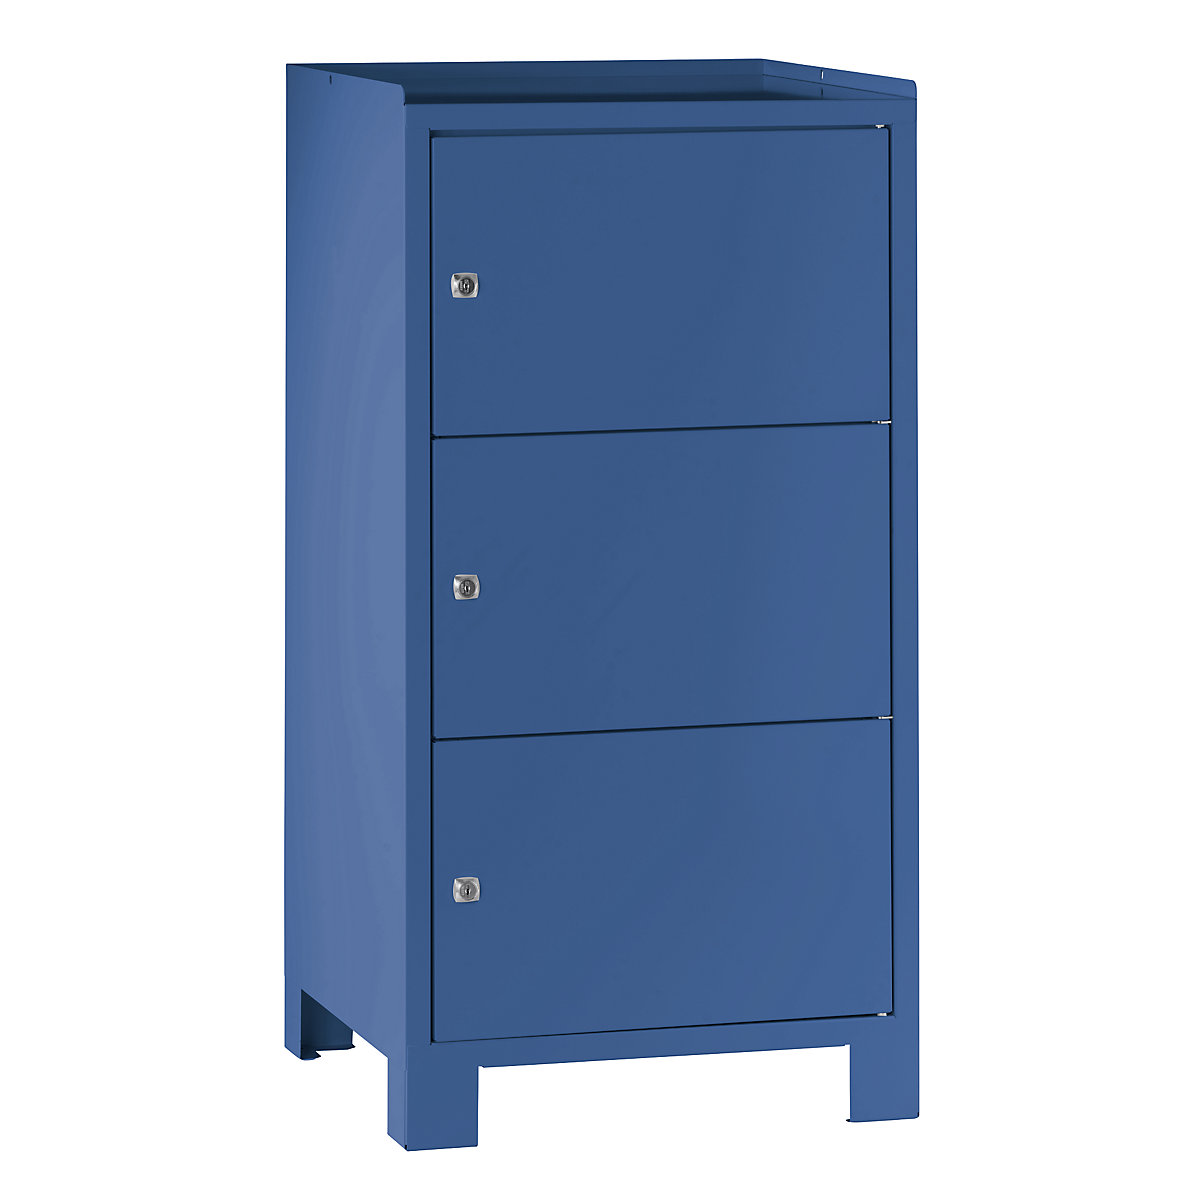 Tool cupboard with feet – Wolf, HxWxD 1000 x 500 x 500 mm, 3 lockable compartments, brilliant blue RAL 5007-10